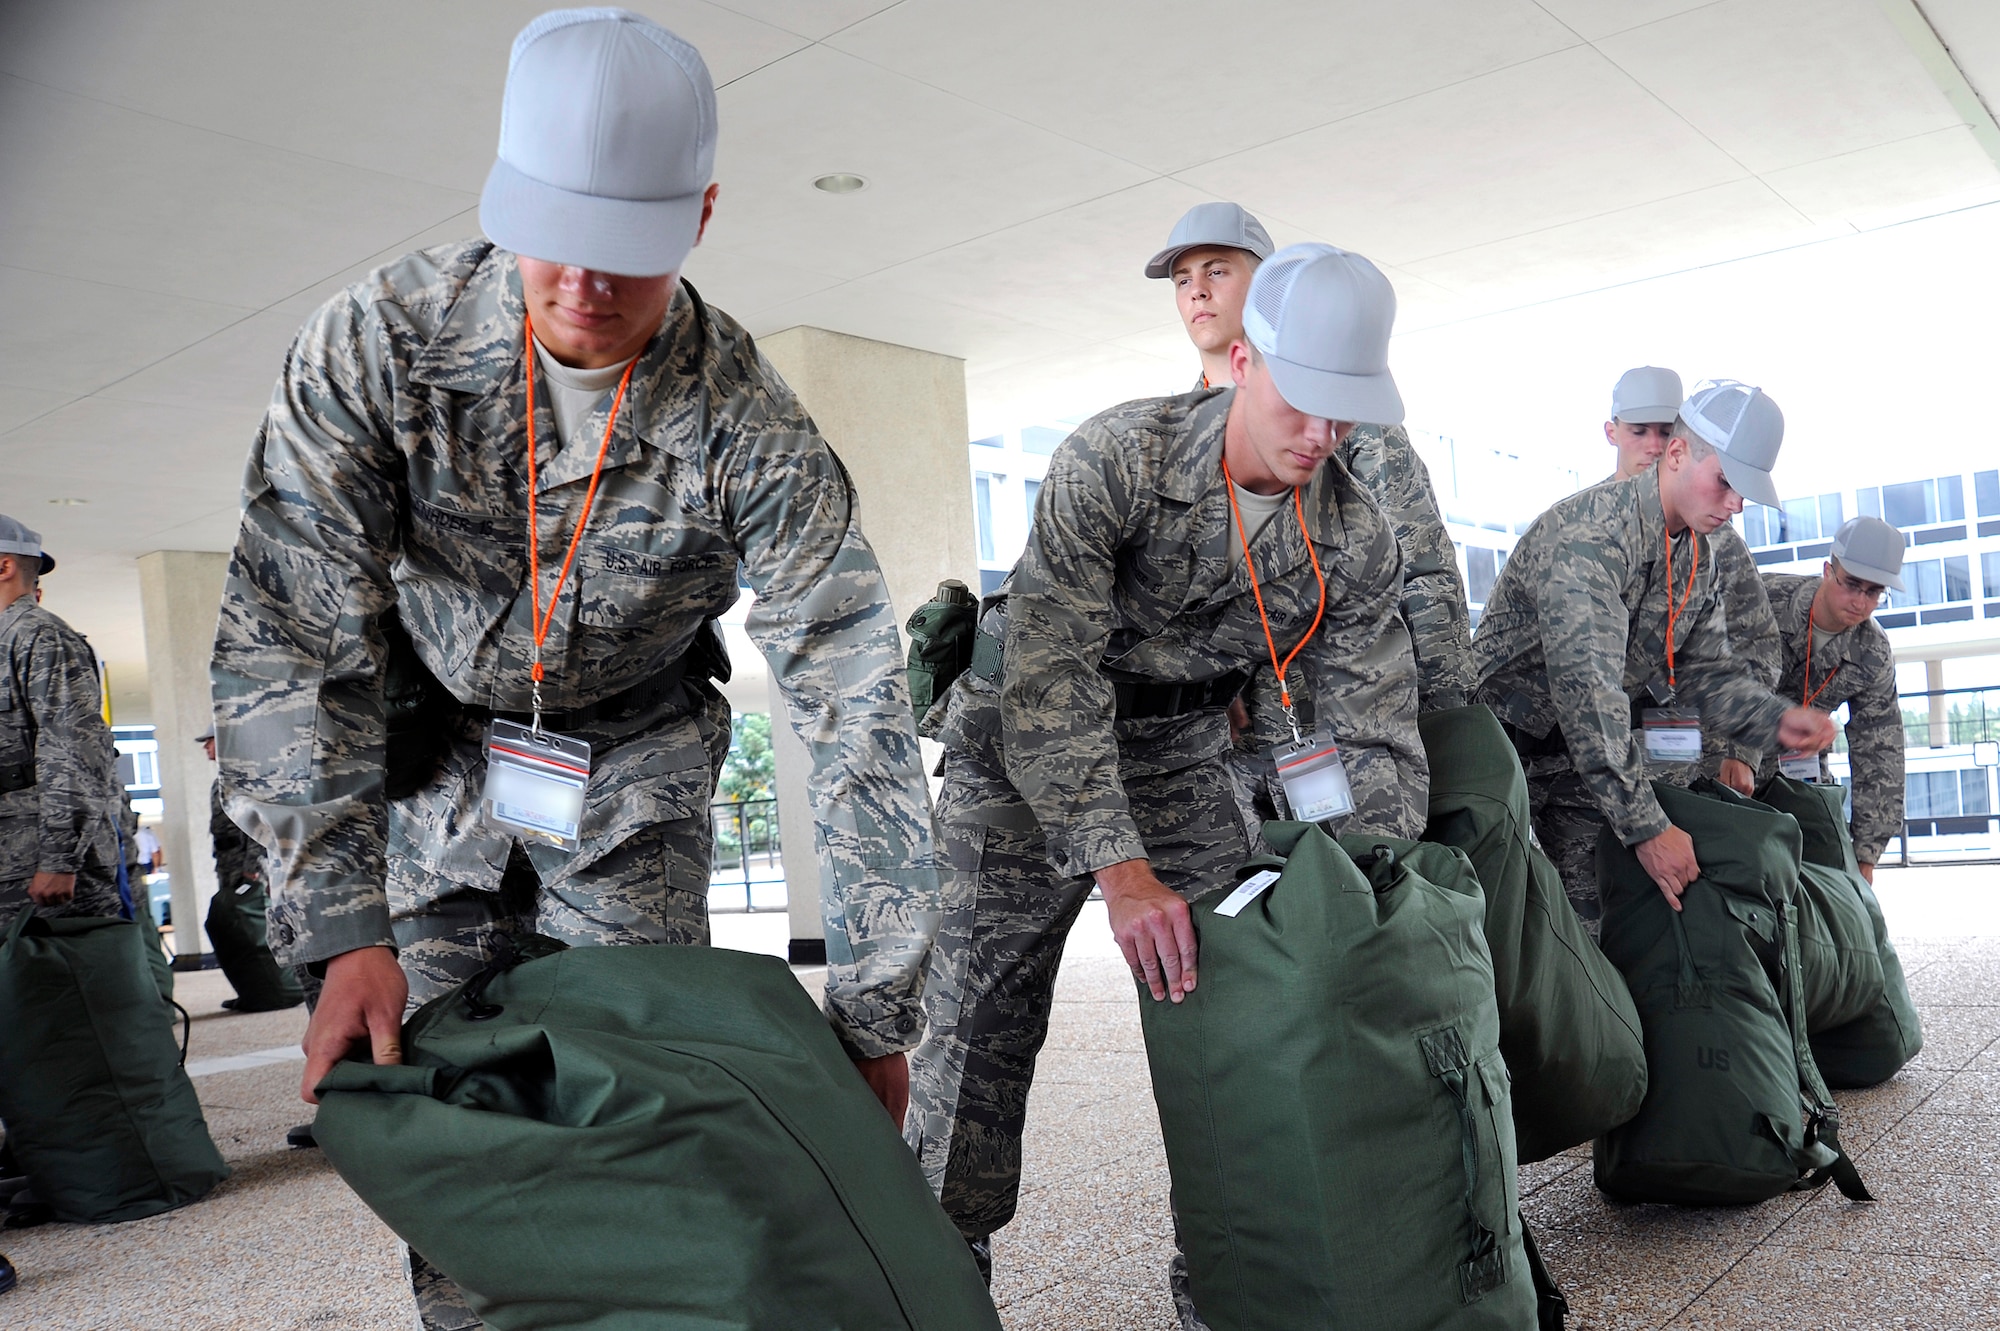 Basic cadets pack issued equipment into duffelbags during Class of 2013 cadet inprocessing at the U.S. Air Force Academy in Colorado Springs, Colo., June 25. Issue items include Airman Battle Uniforms and physical training uniforms. (U.S. Air Force photo/Mike Kaplan)